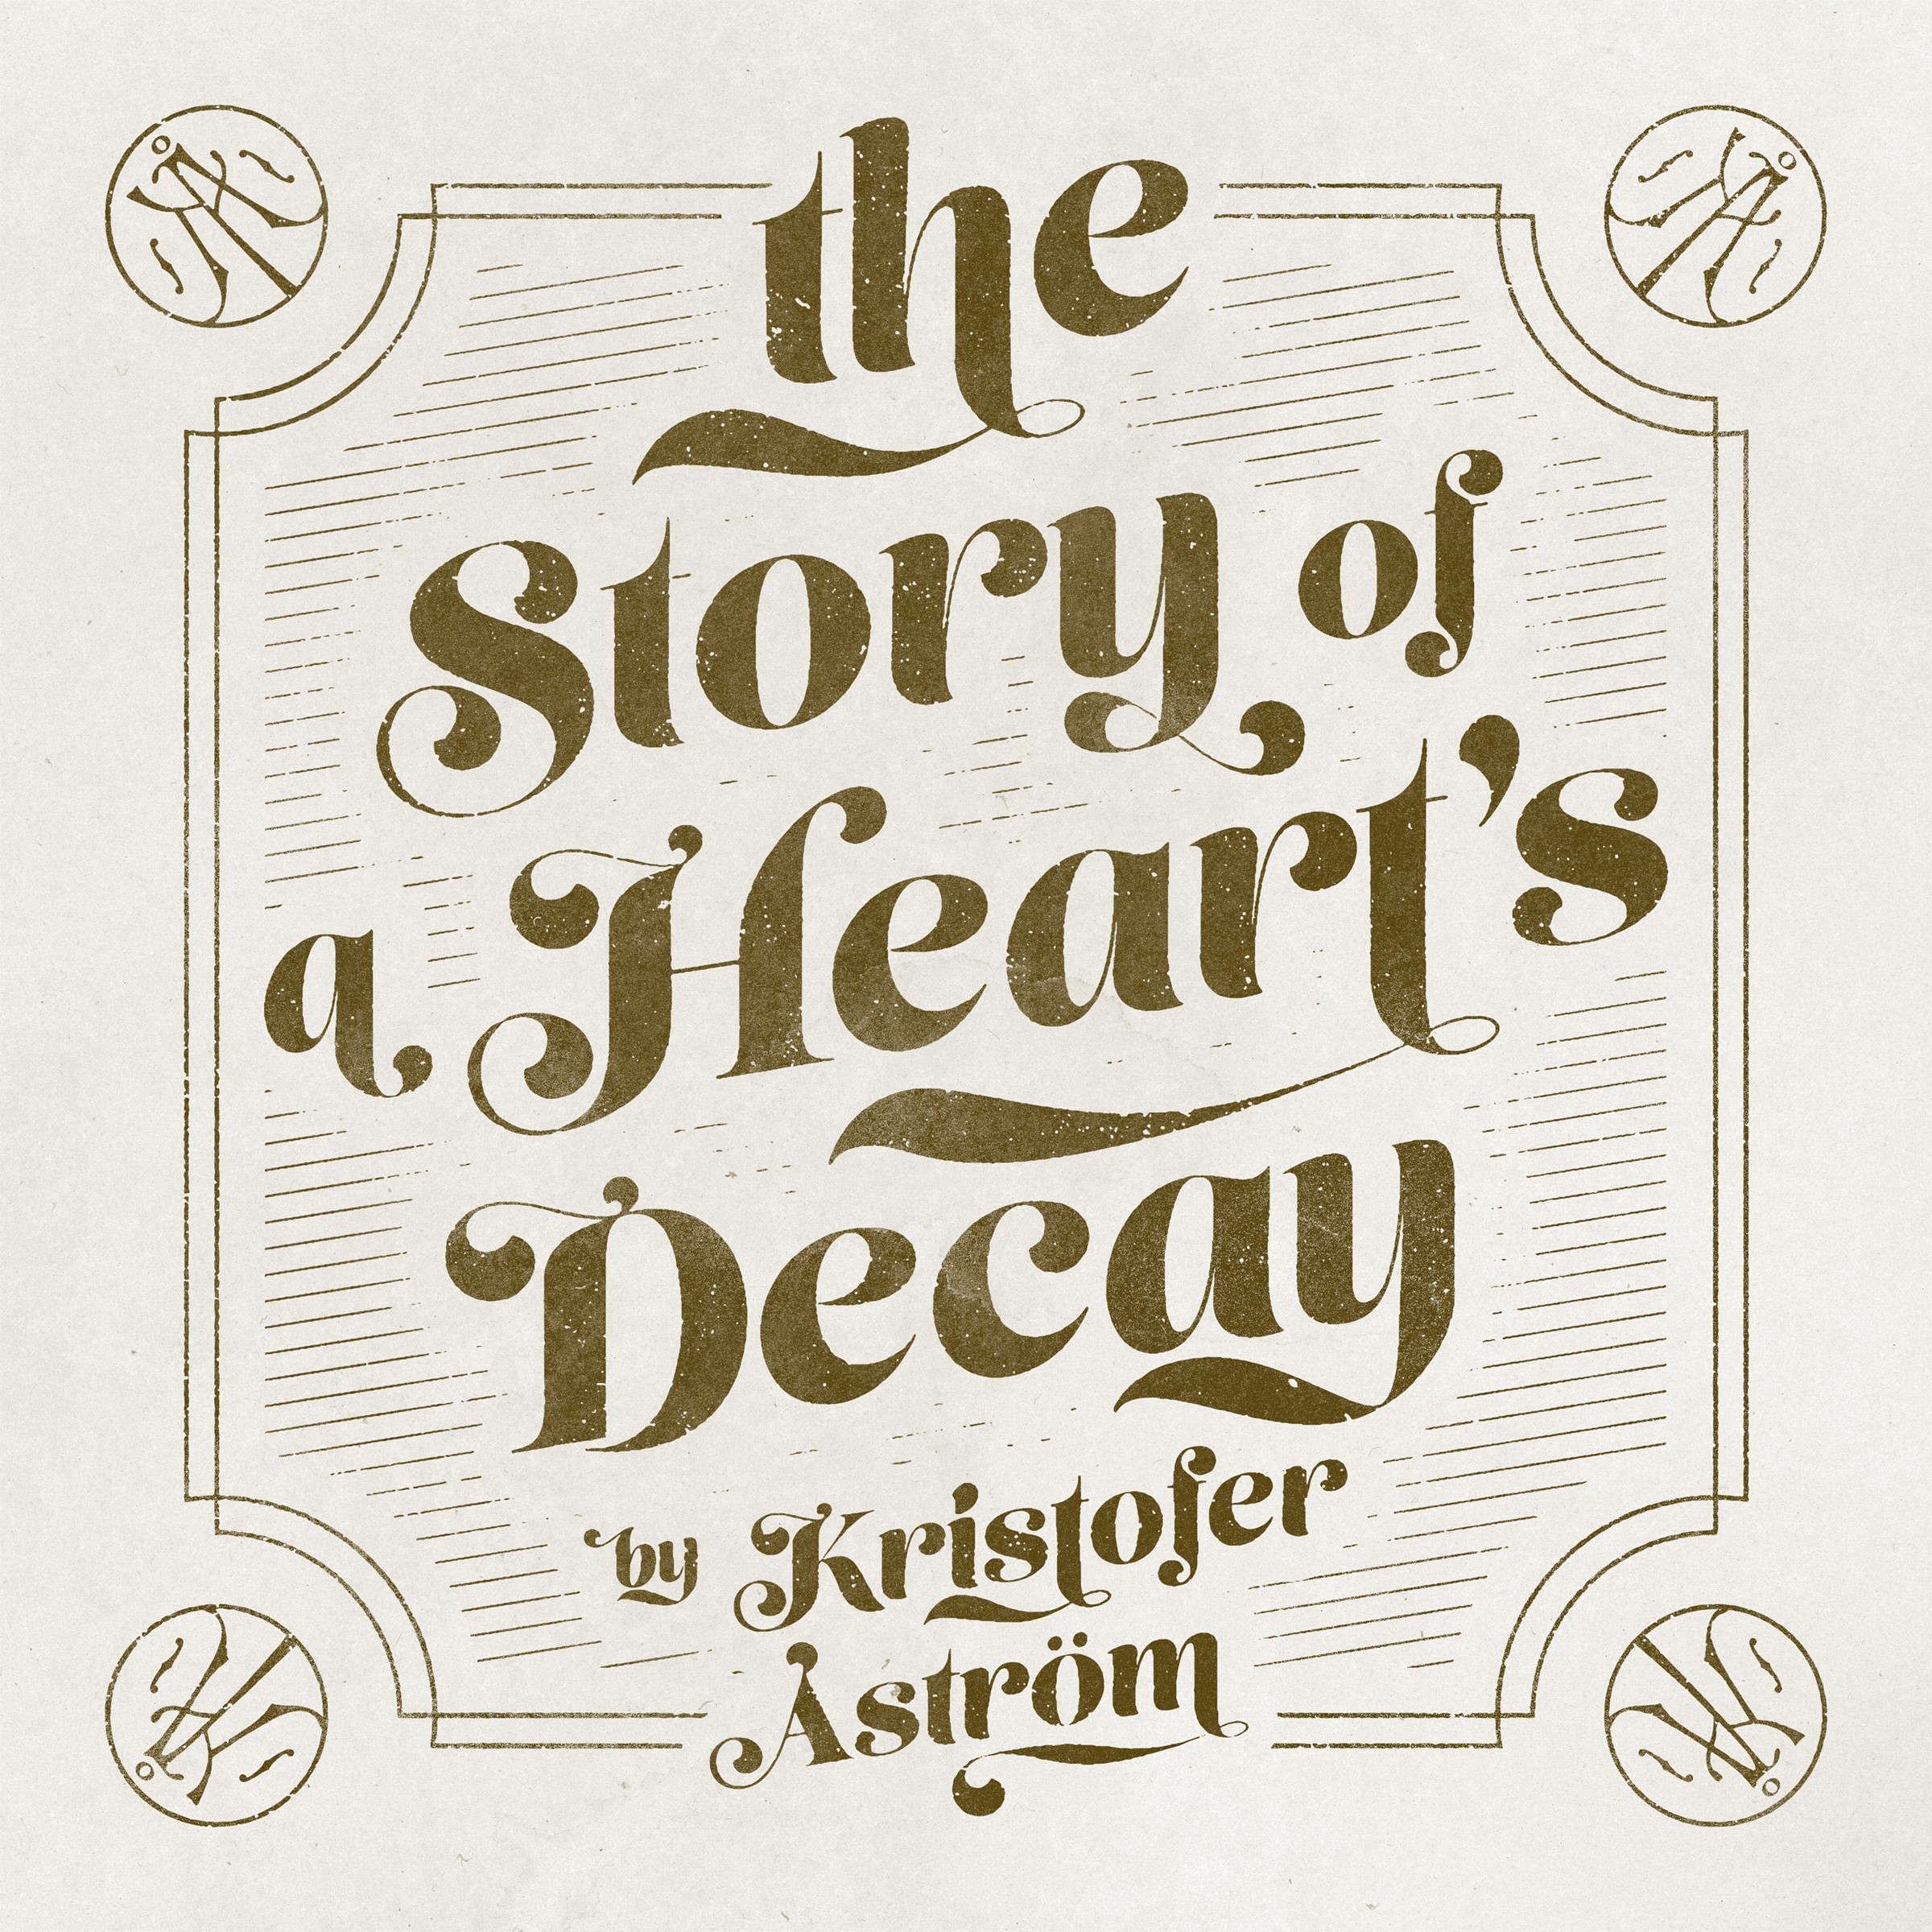 Kristofer Astrom Story of a hearts decay